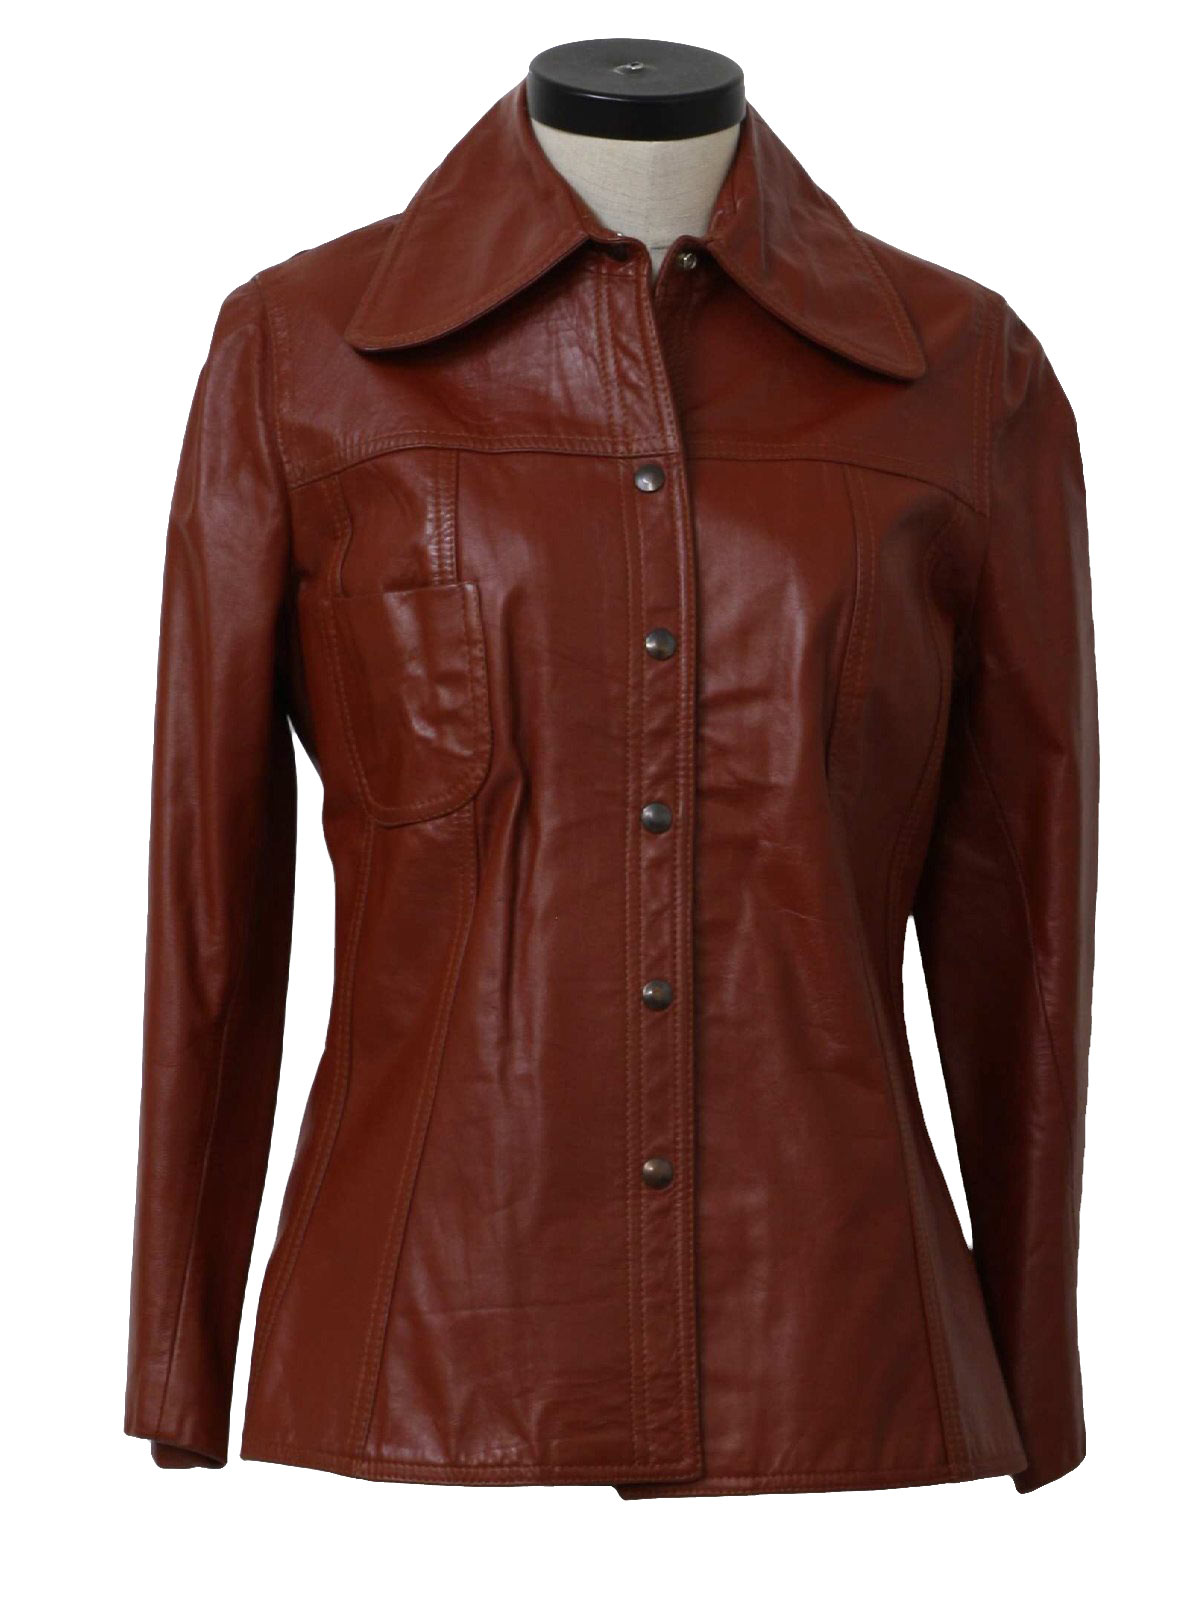 Seventies Imperial Leather Jacket: Early 70s -Imperial- Womens rust red ...